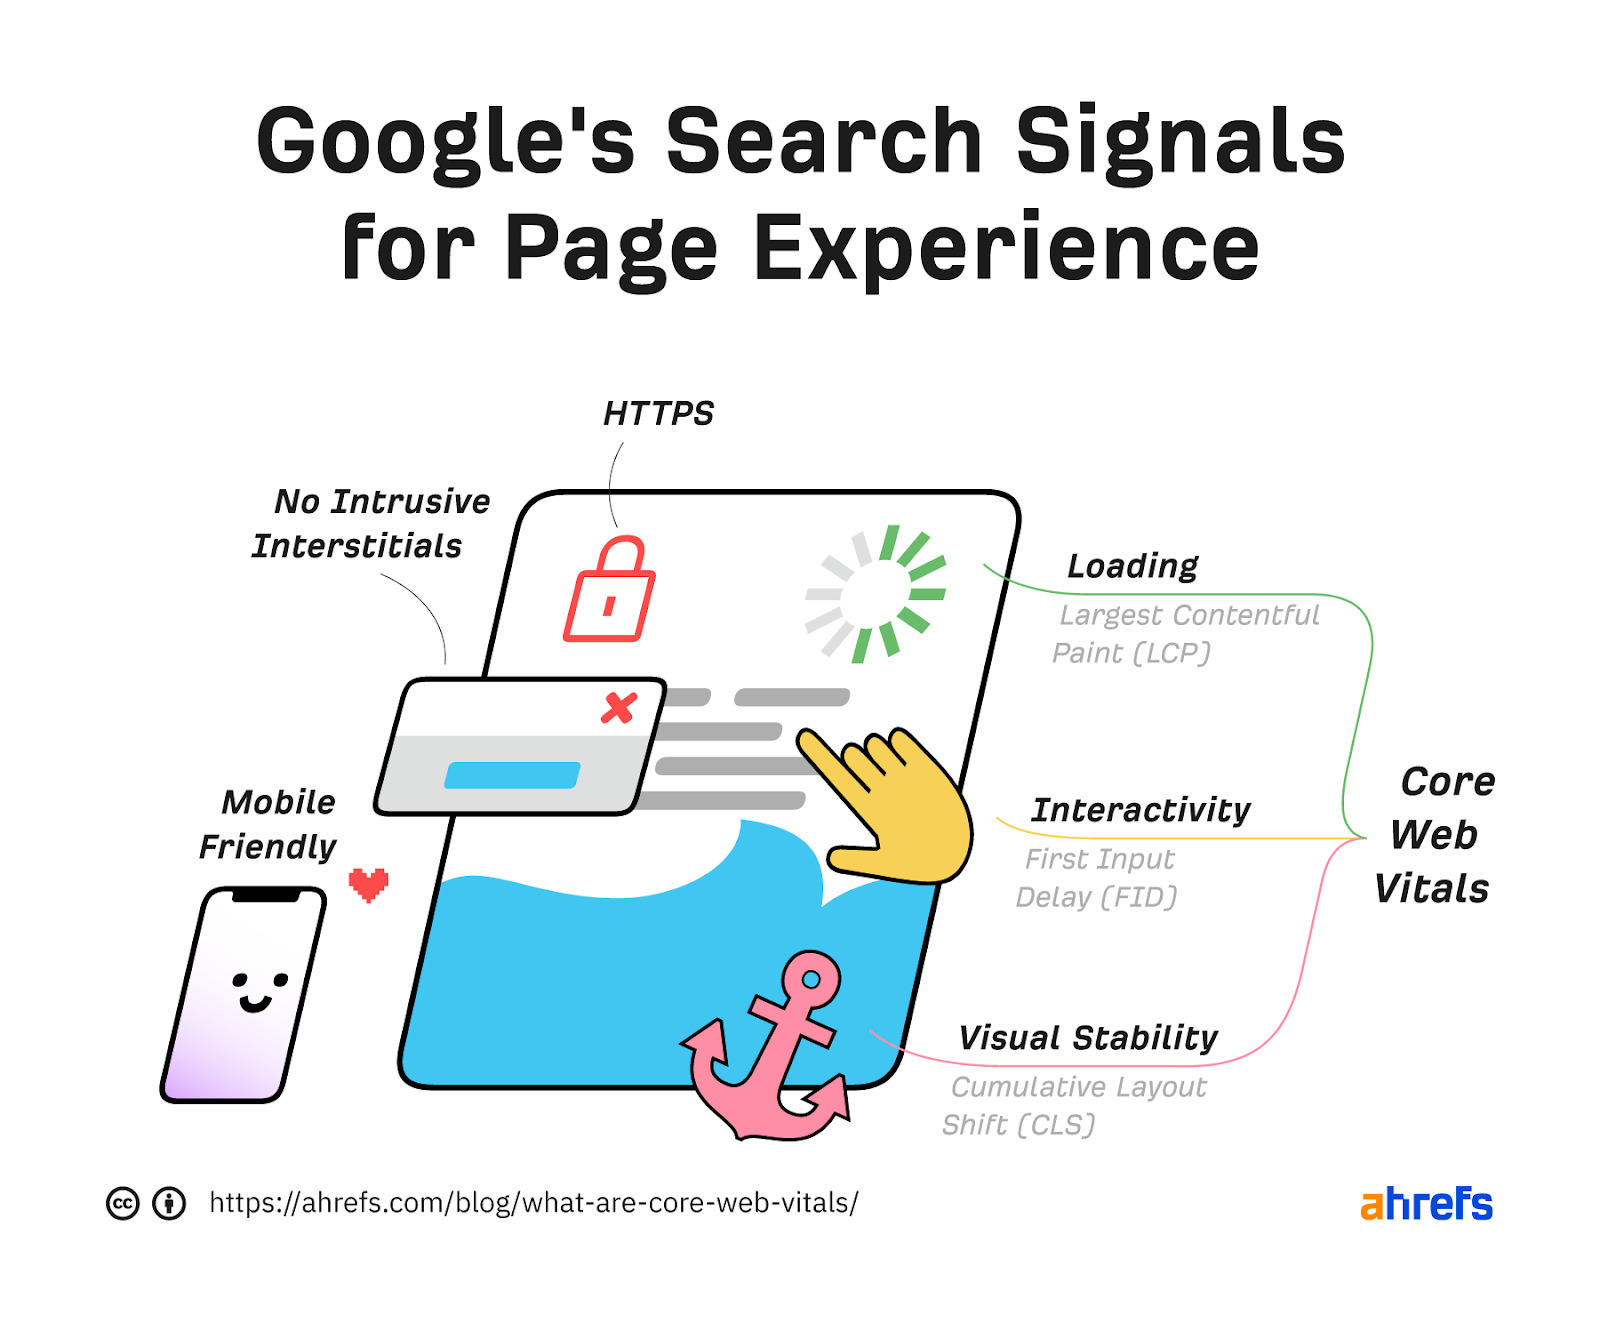 Google's search signals for page experience